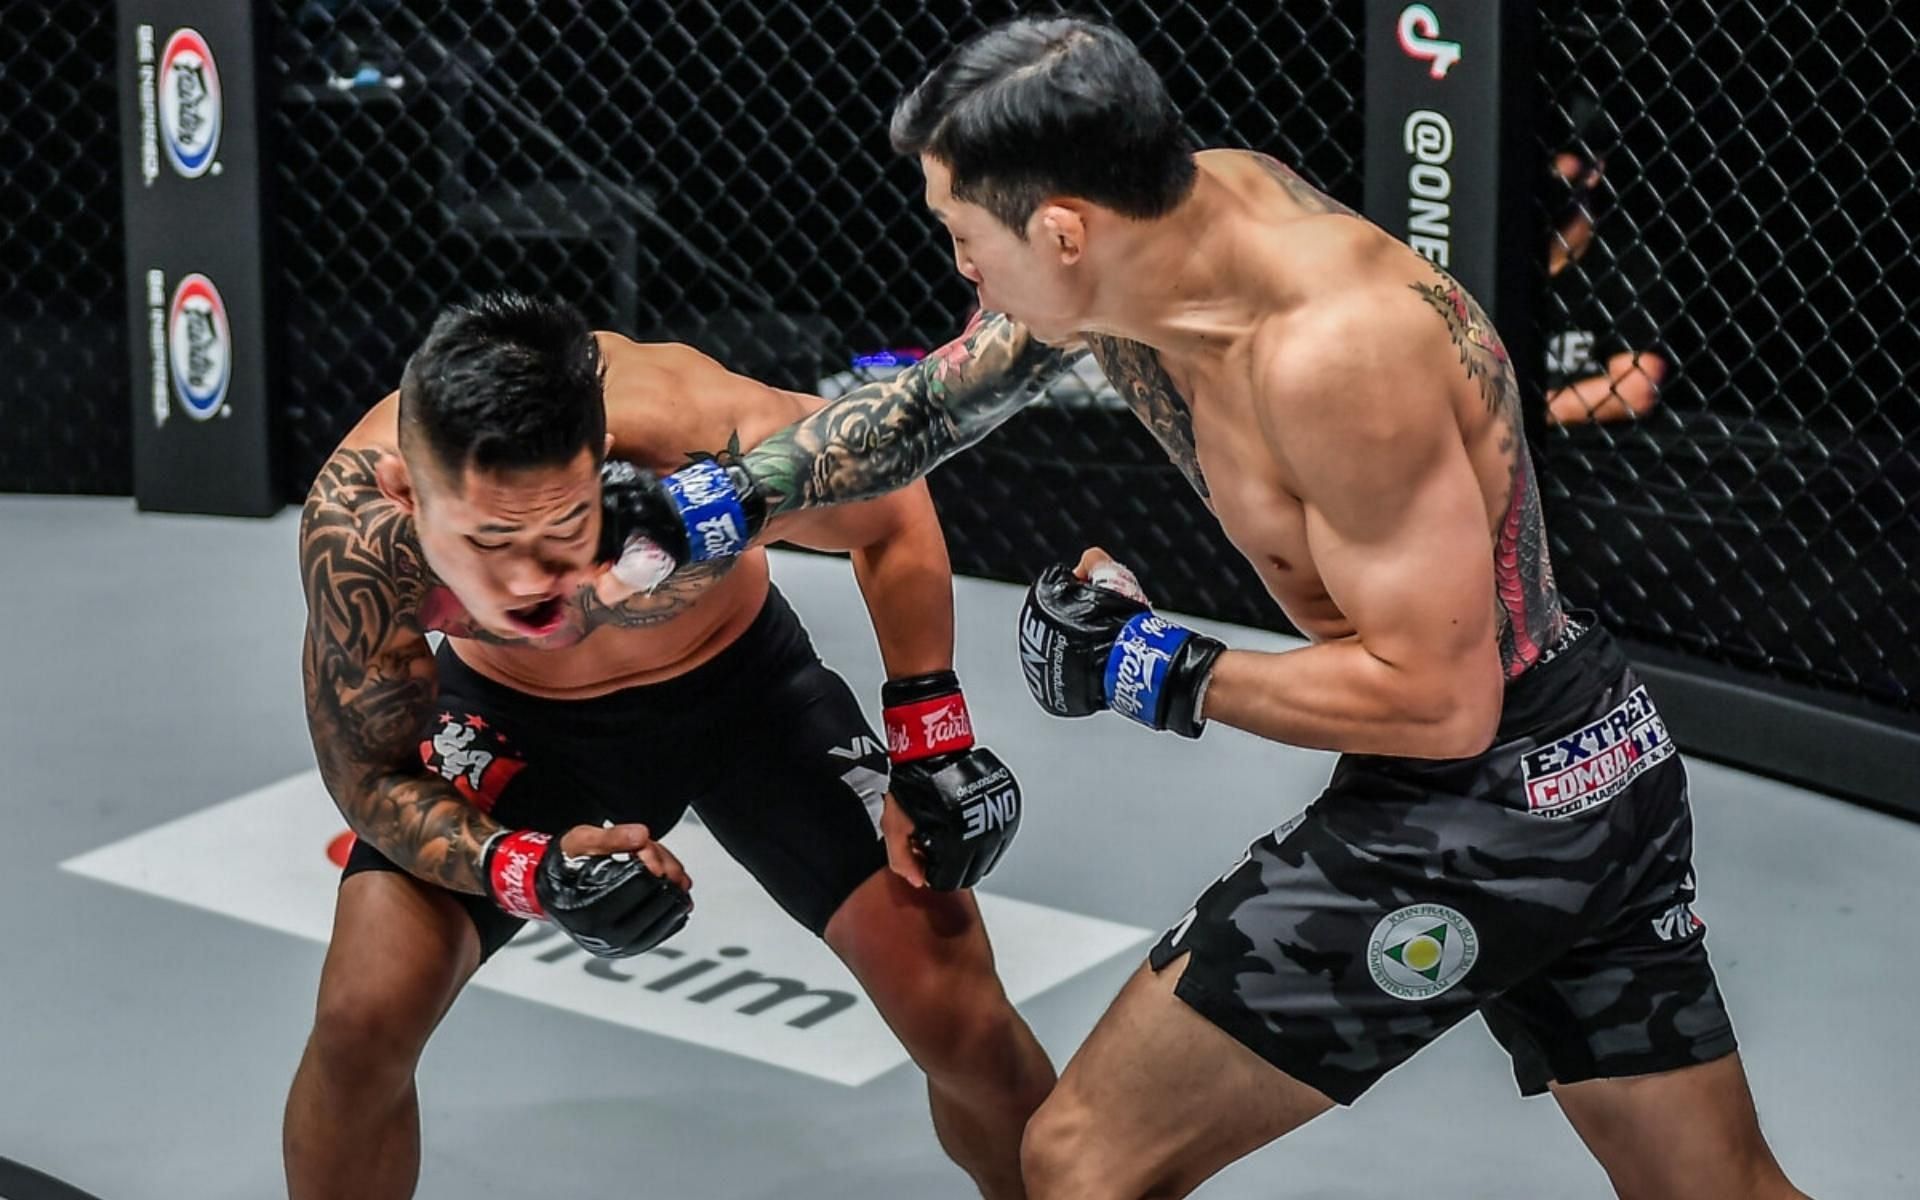 Kim Jae Woong (right) knocked out former ONE Championship world champion Martin Nguyen (left) inside one round. (Image courtesy of ONE Championship)